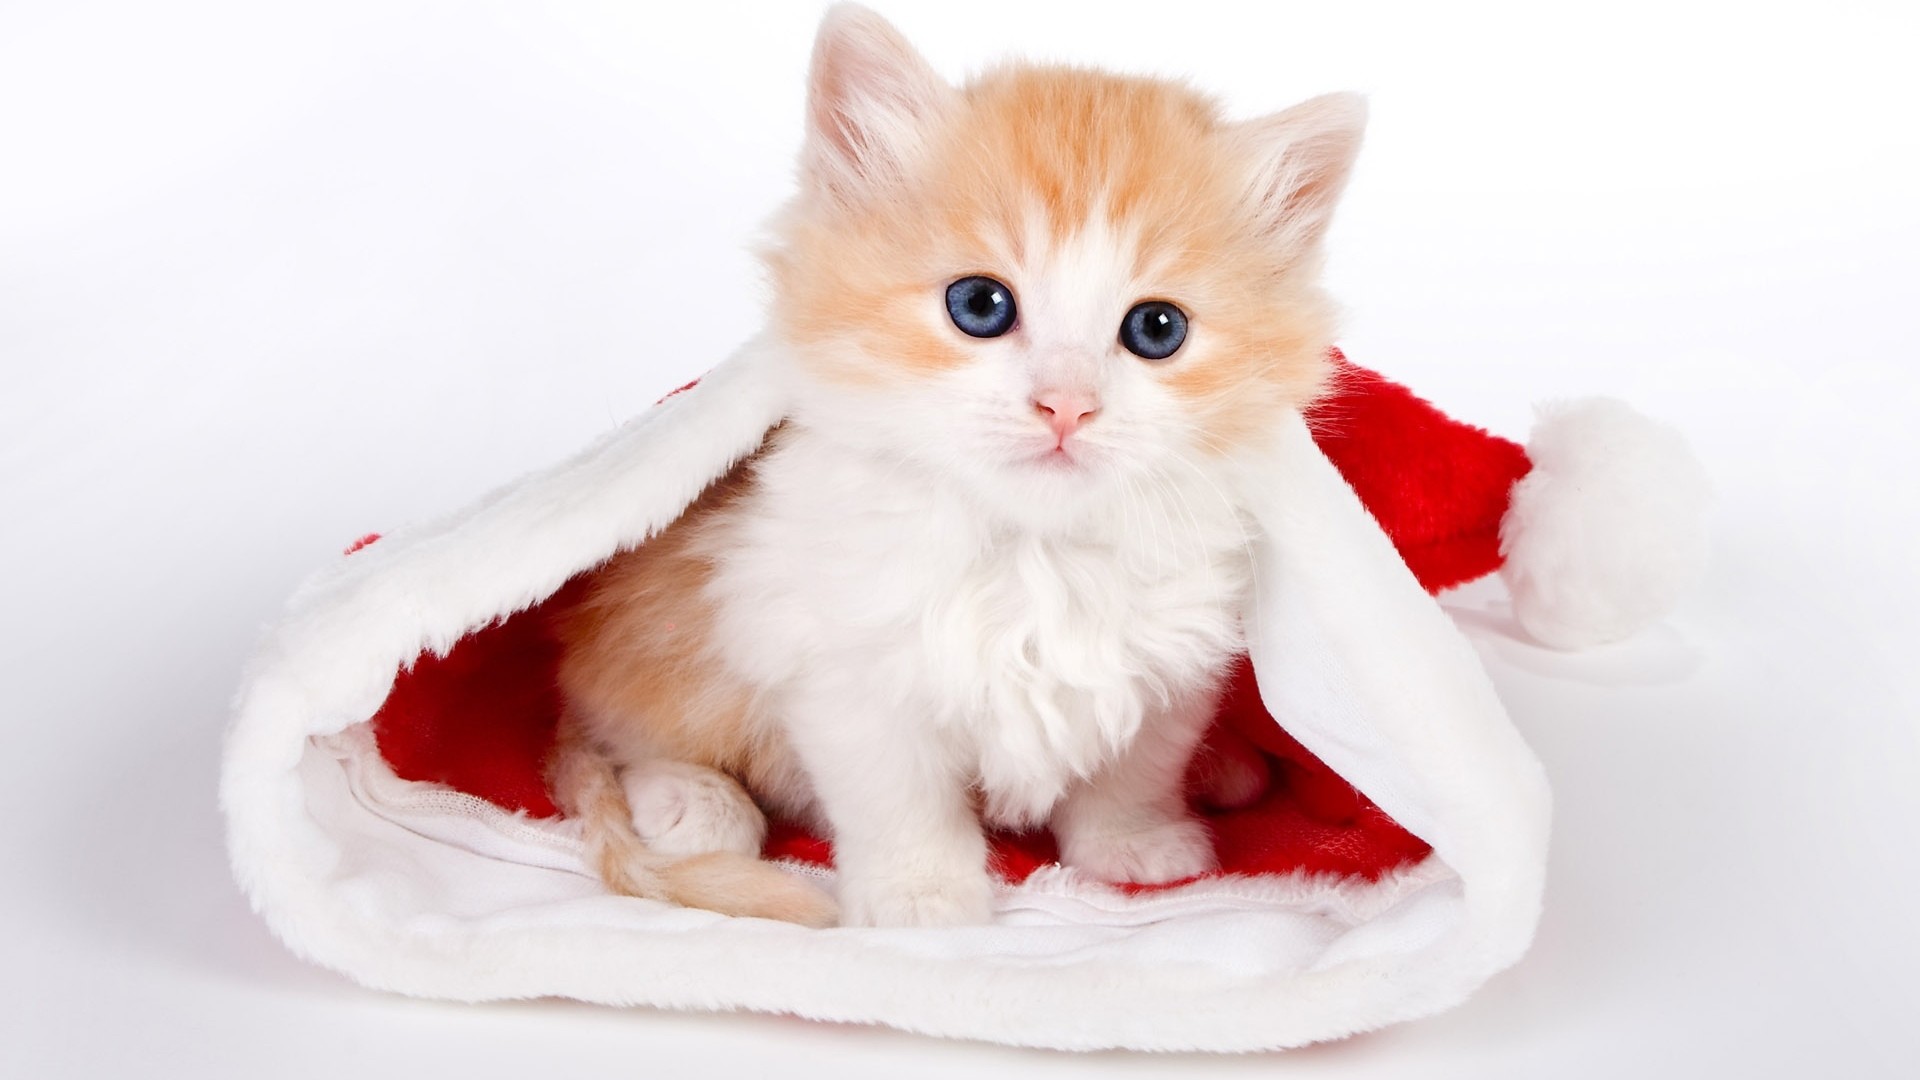 1920x1080 Kitten Cute Pictures #6981706 - HD Wallpapers